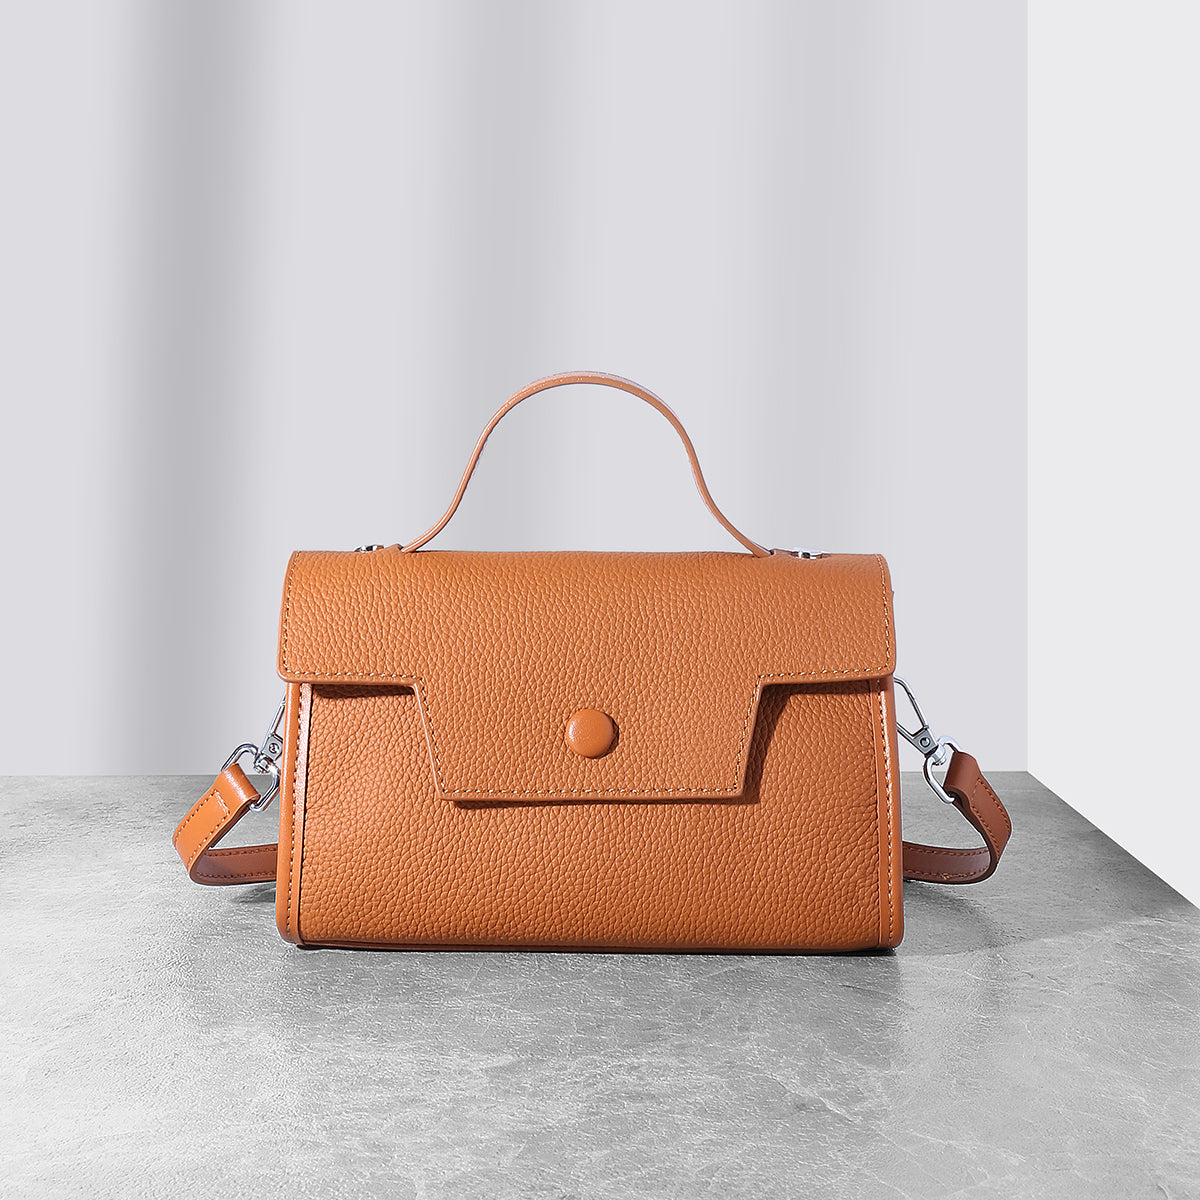 Crossbody Bags - Lightweight leather, shoulders are no longer tired.